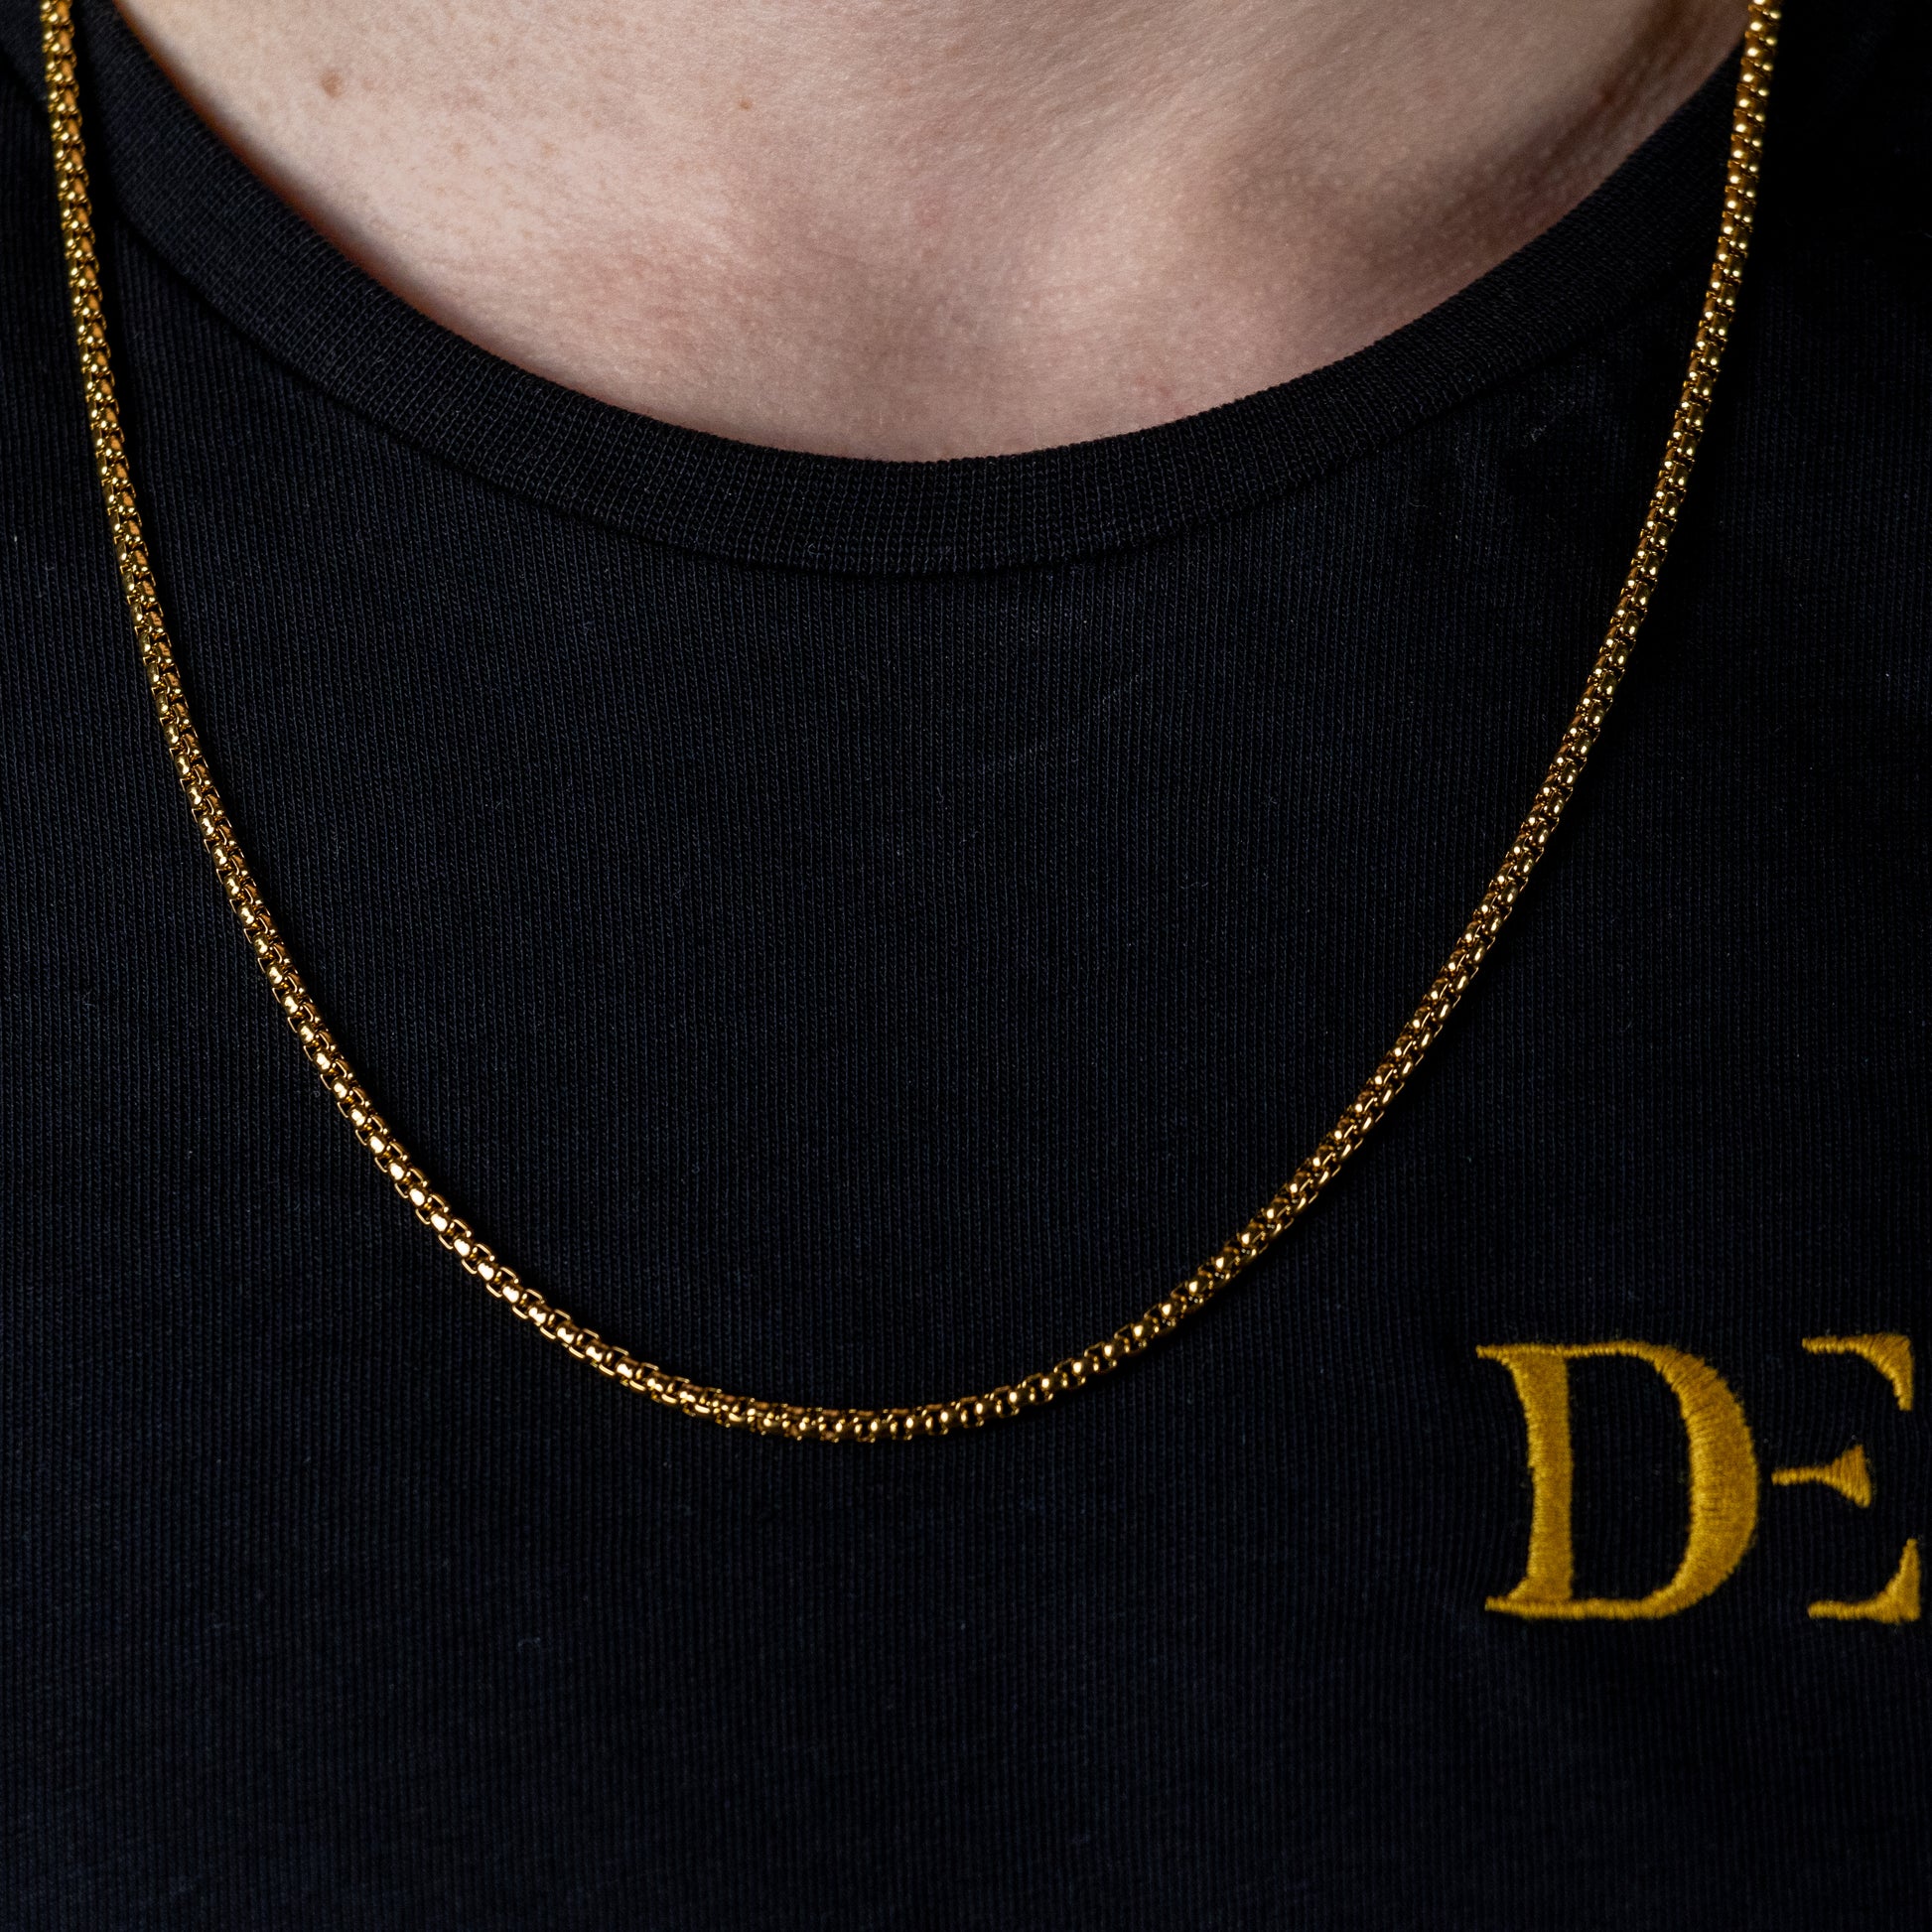 The image captures a close-up of a slender, gold chain necklace worn by someone in a black crew neck shirt with the golden lettering 'DE' visible, suggesting it may be branded apparel. The necklace's simplicity complements the implied innovative and stylish design ethos of DriftElement, a youthful German startup known for creating watches with unique rim designs, reflecting their commitment to both elegance and automotive-inspired aesthetics.